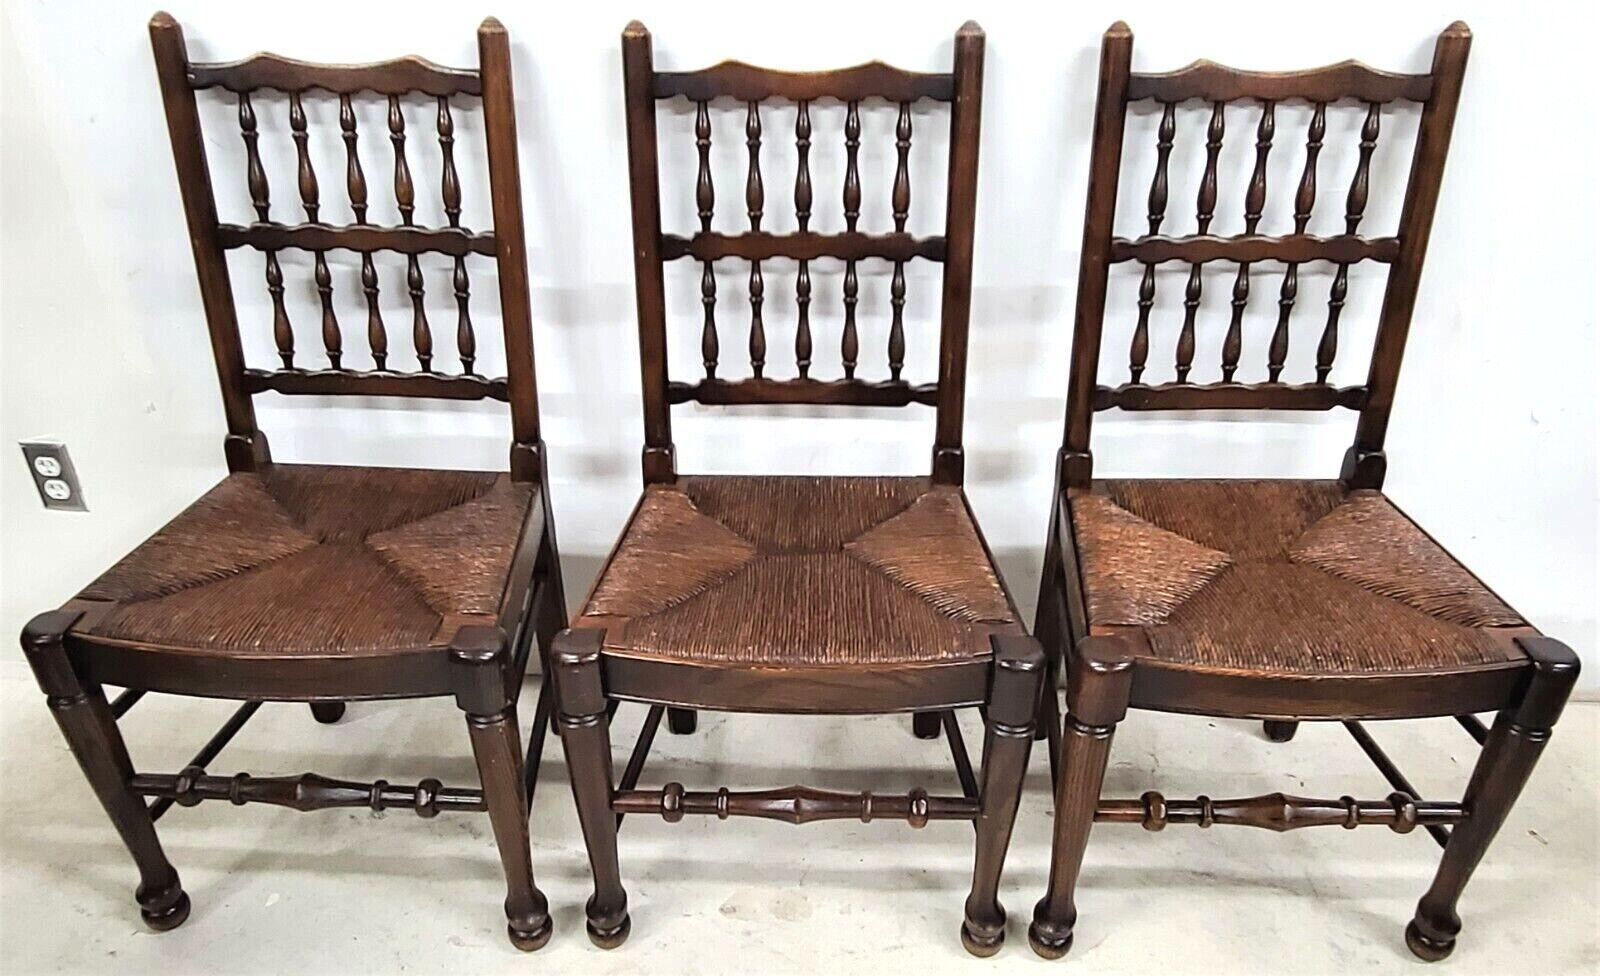 For FULL item description be sure to click on CONTINUE READING at the bottom of this listing.

Offering One of our recent palm beach estate fine furniture acquisitions of a
Set of 5 Lancashire Dining Chairs Antique English Oak Spindle Back Rush